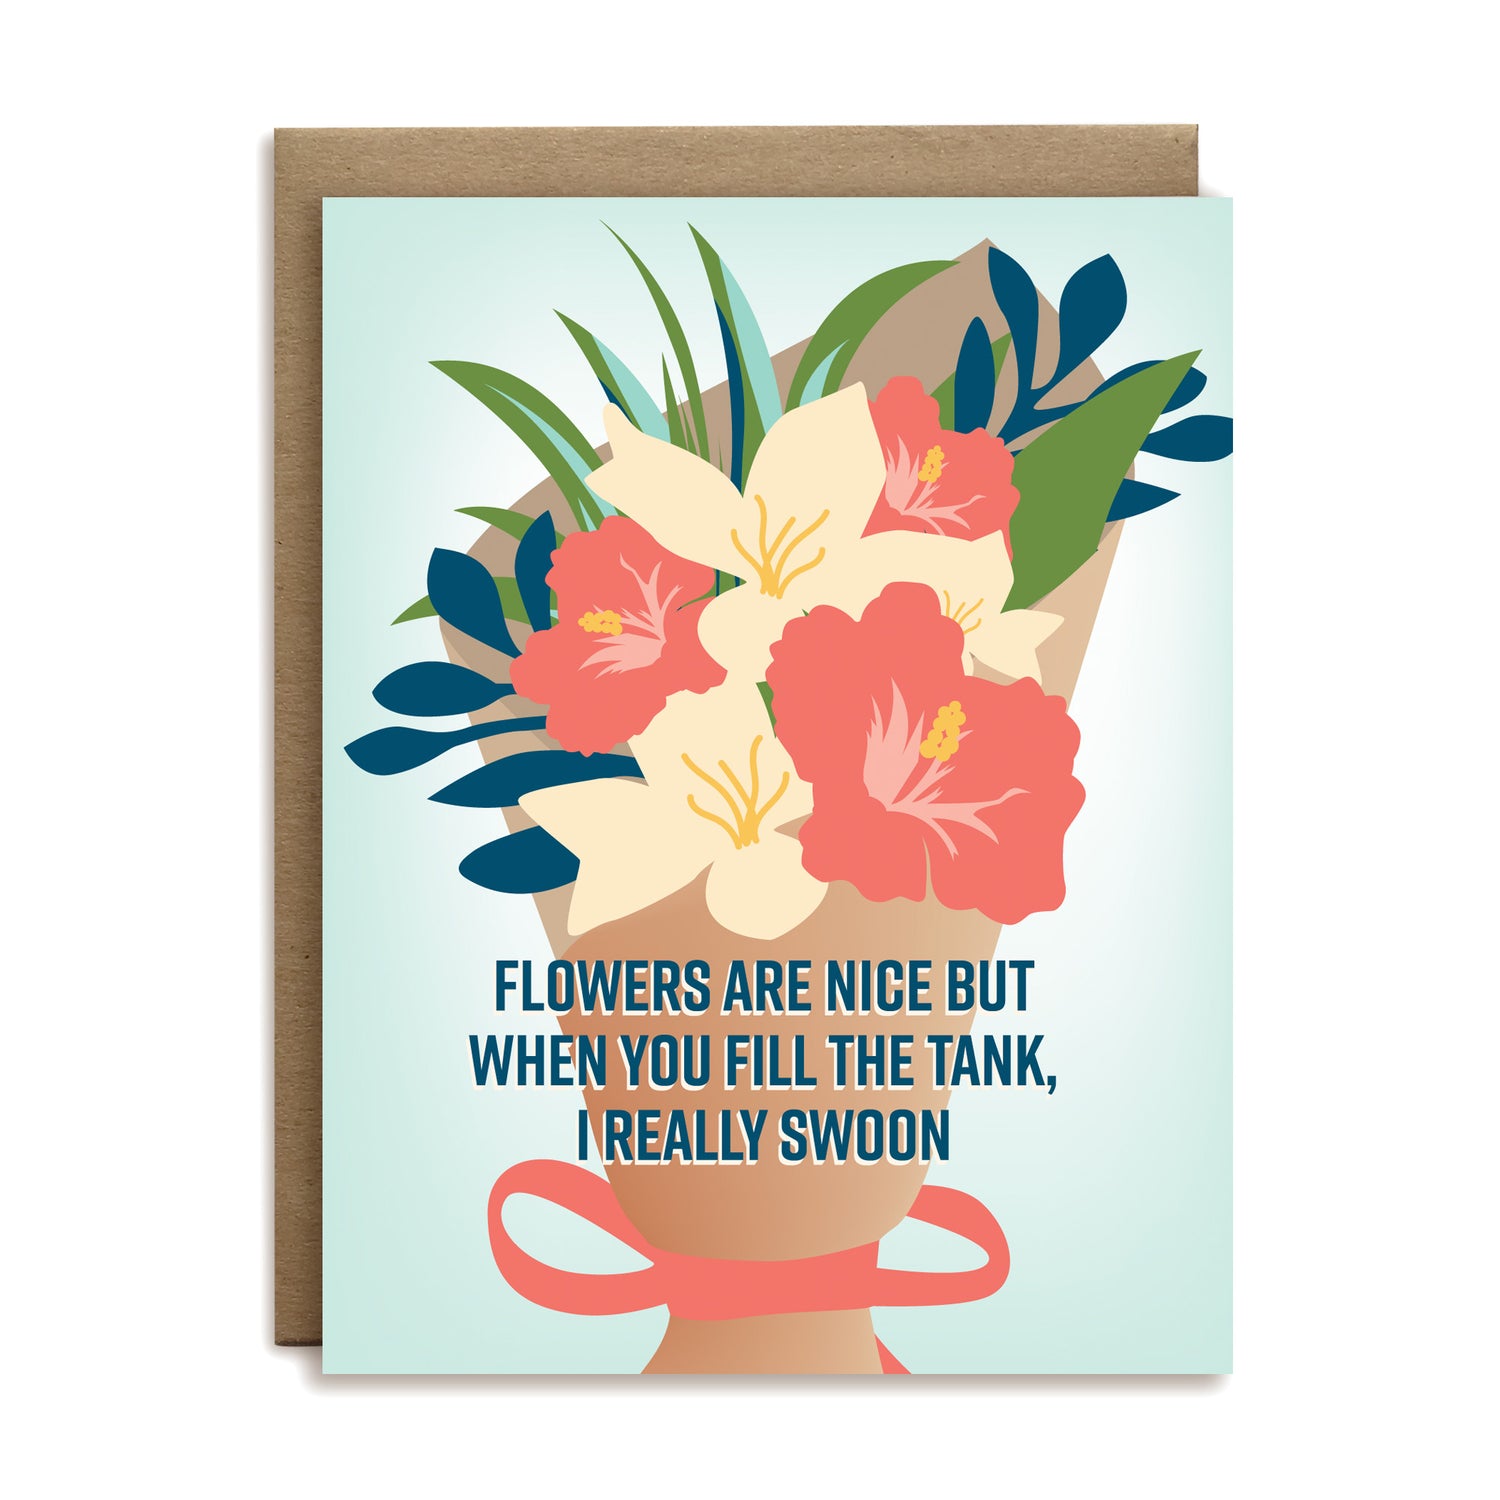 Flowers are nice but when you fill the tank, I really swoon love greeting card by I&